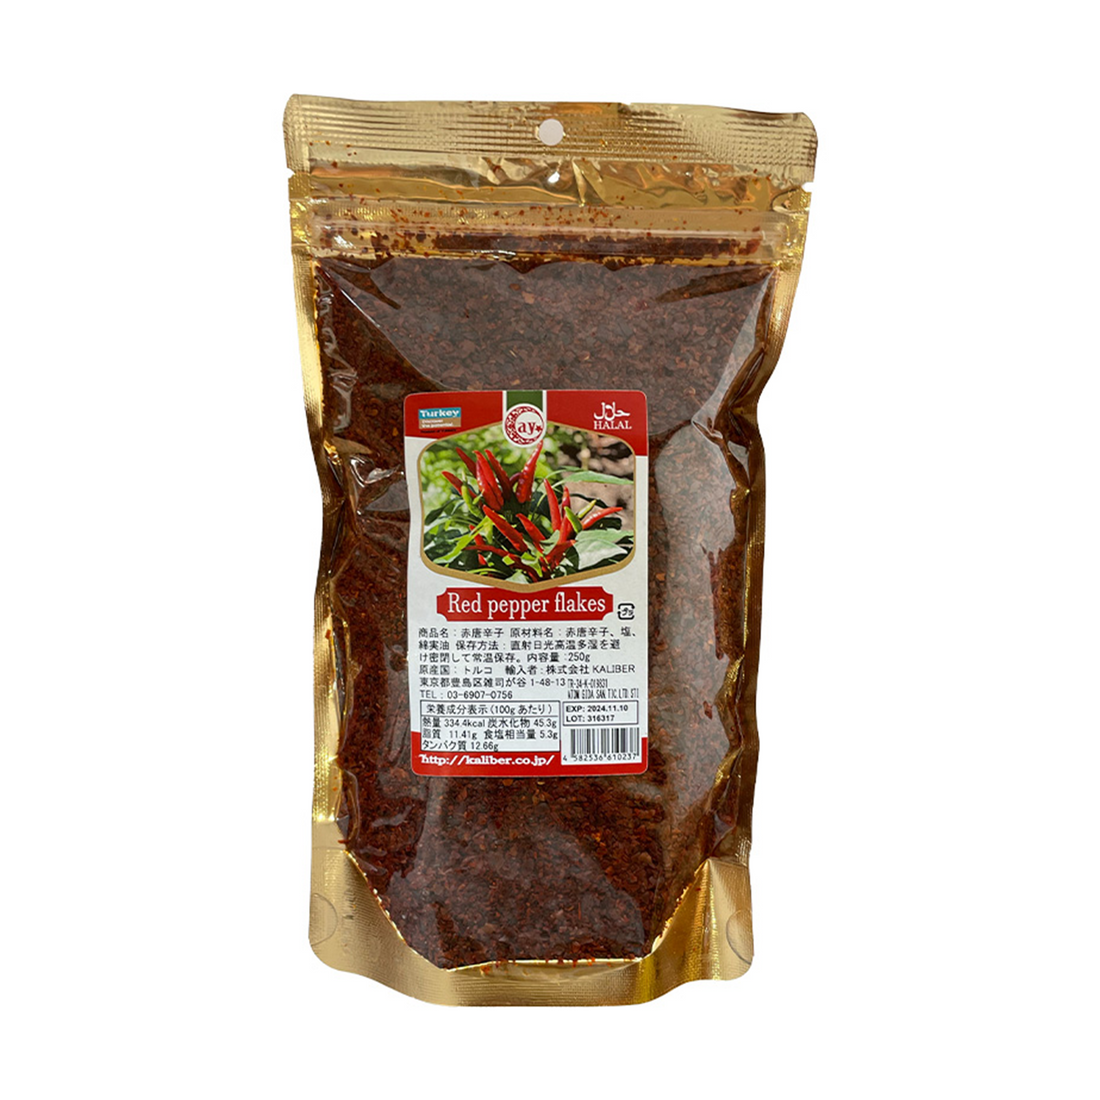 Ay Pul Biber Coarsely Ground Red Pepper Flakes 250g | Ay Pul Biber | Red Pepper Flakes